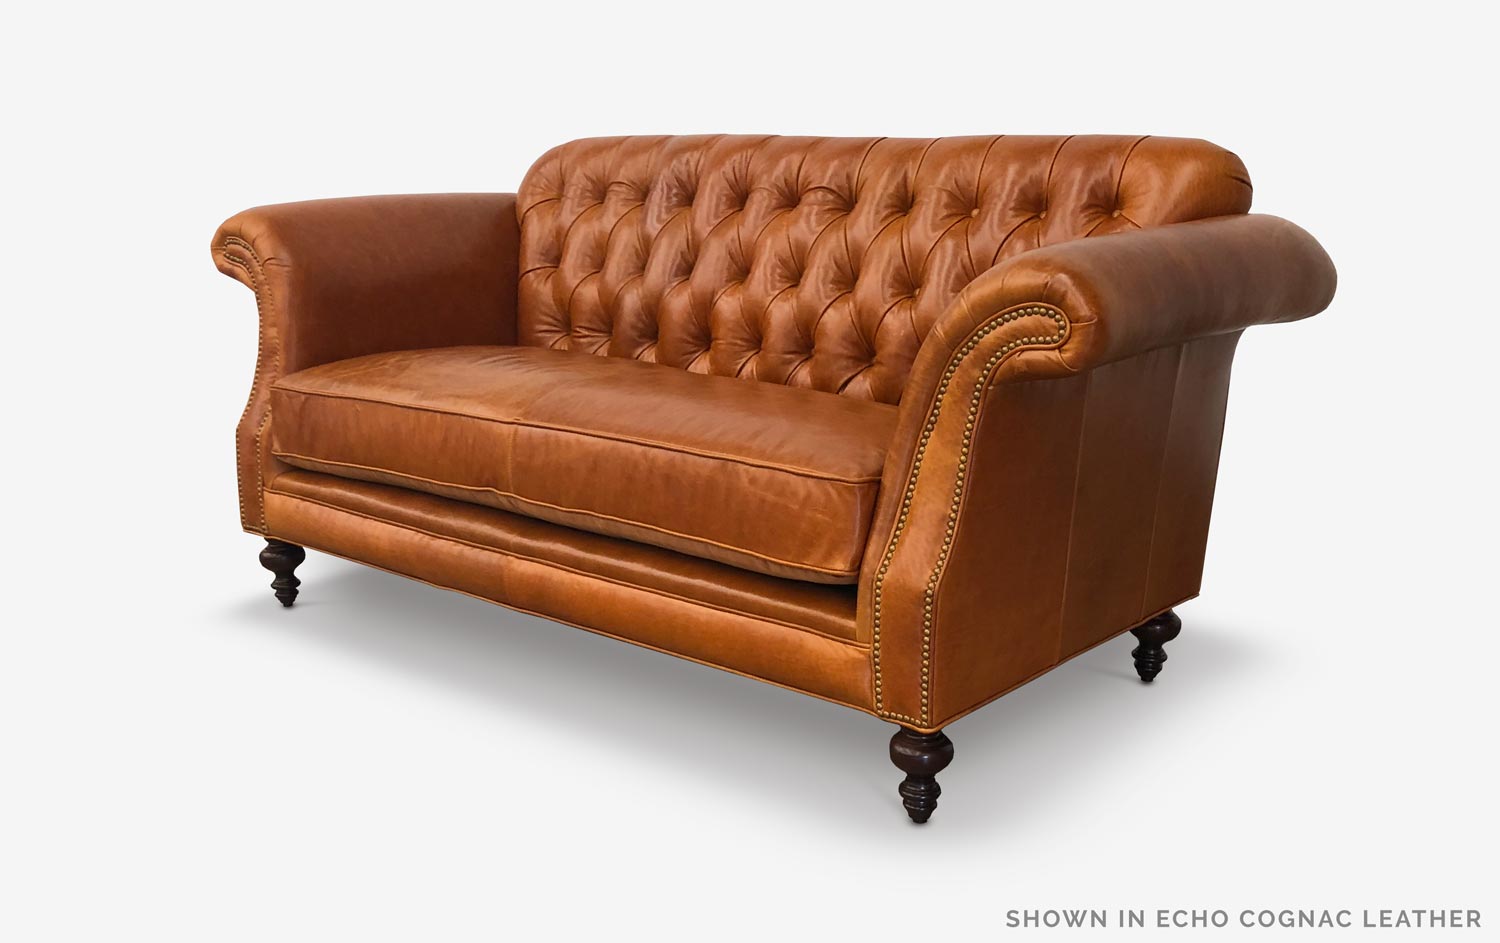 The Riley: High Back Scroll Arm Tufted Chesterfield Love Seat in Echo Cognac Leather